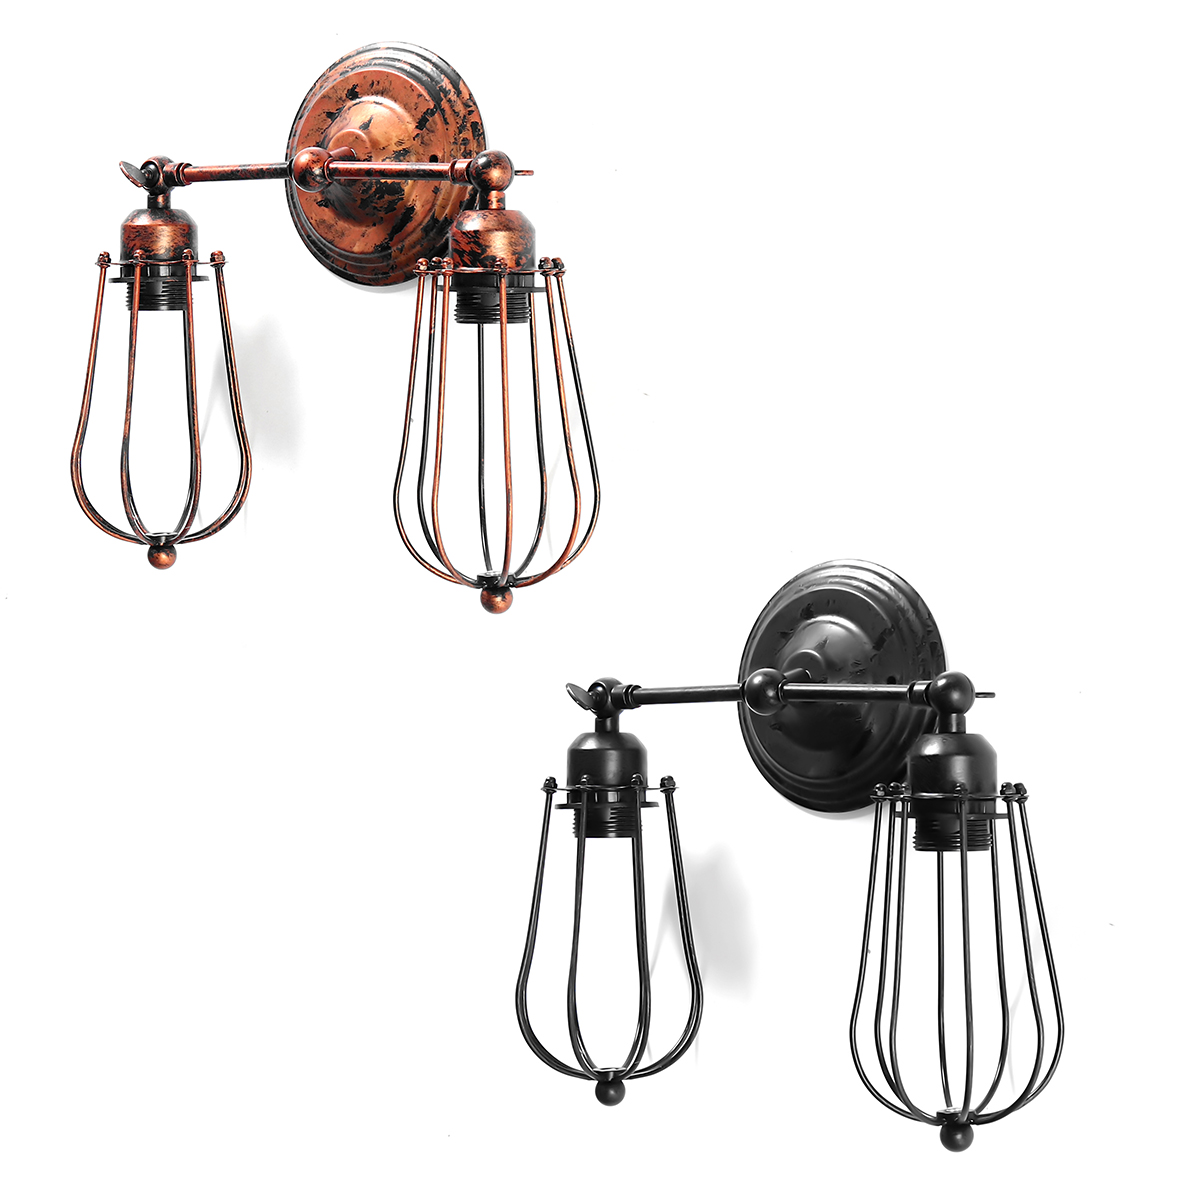 Vintage-Industrial-Wall-Light-Mounted-Sconce-Iron-Retro-Lamp-Fixture-Room-Decor-1682933-8